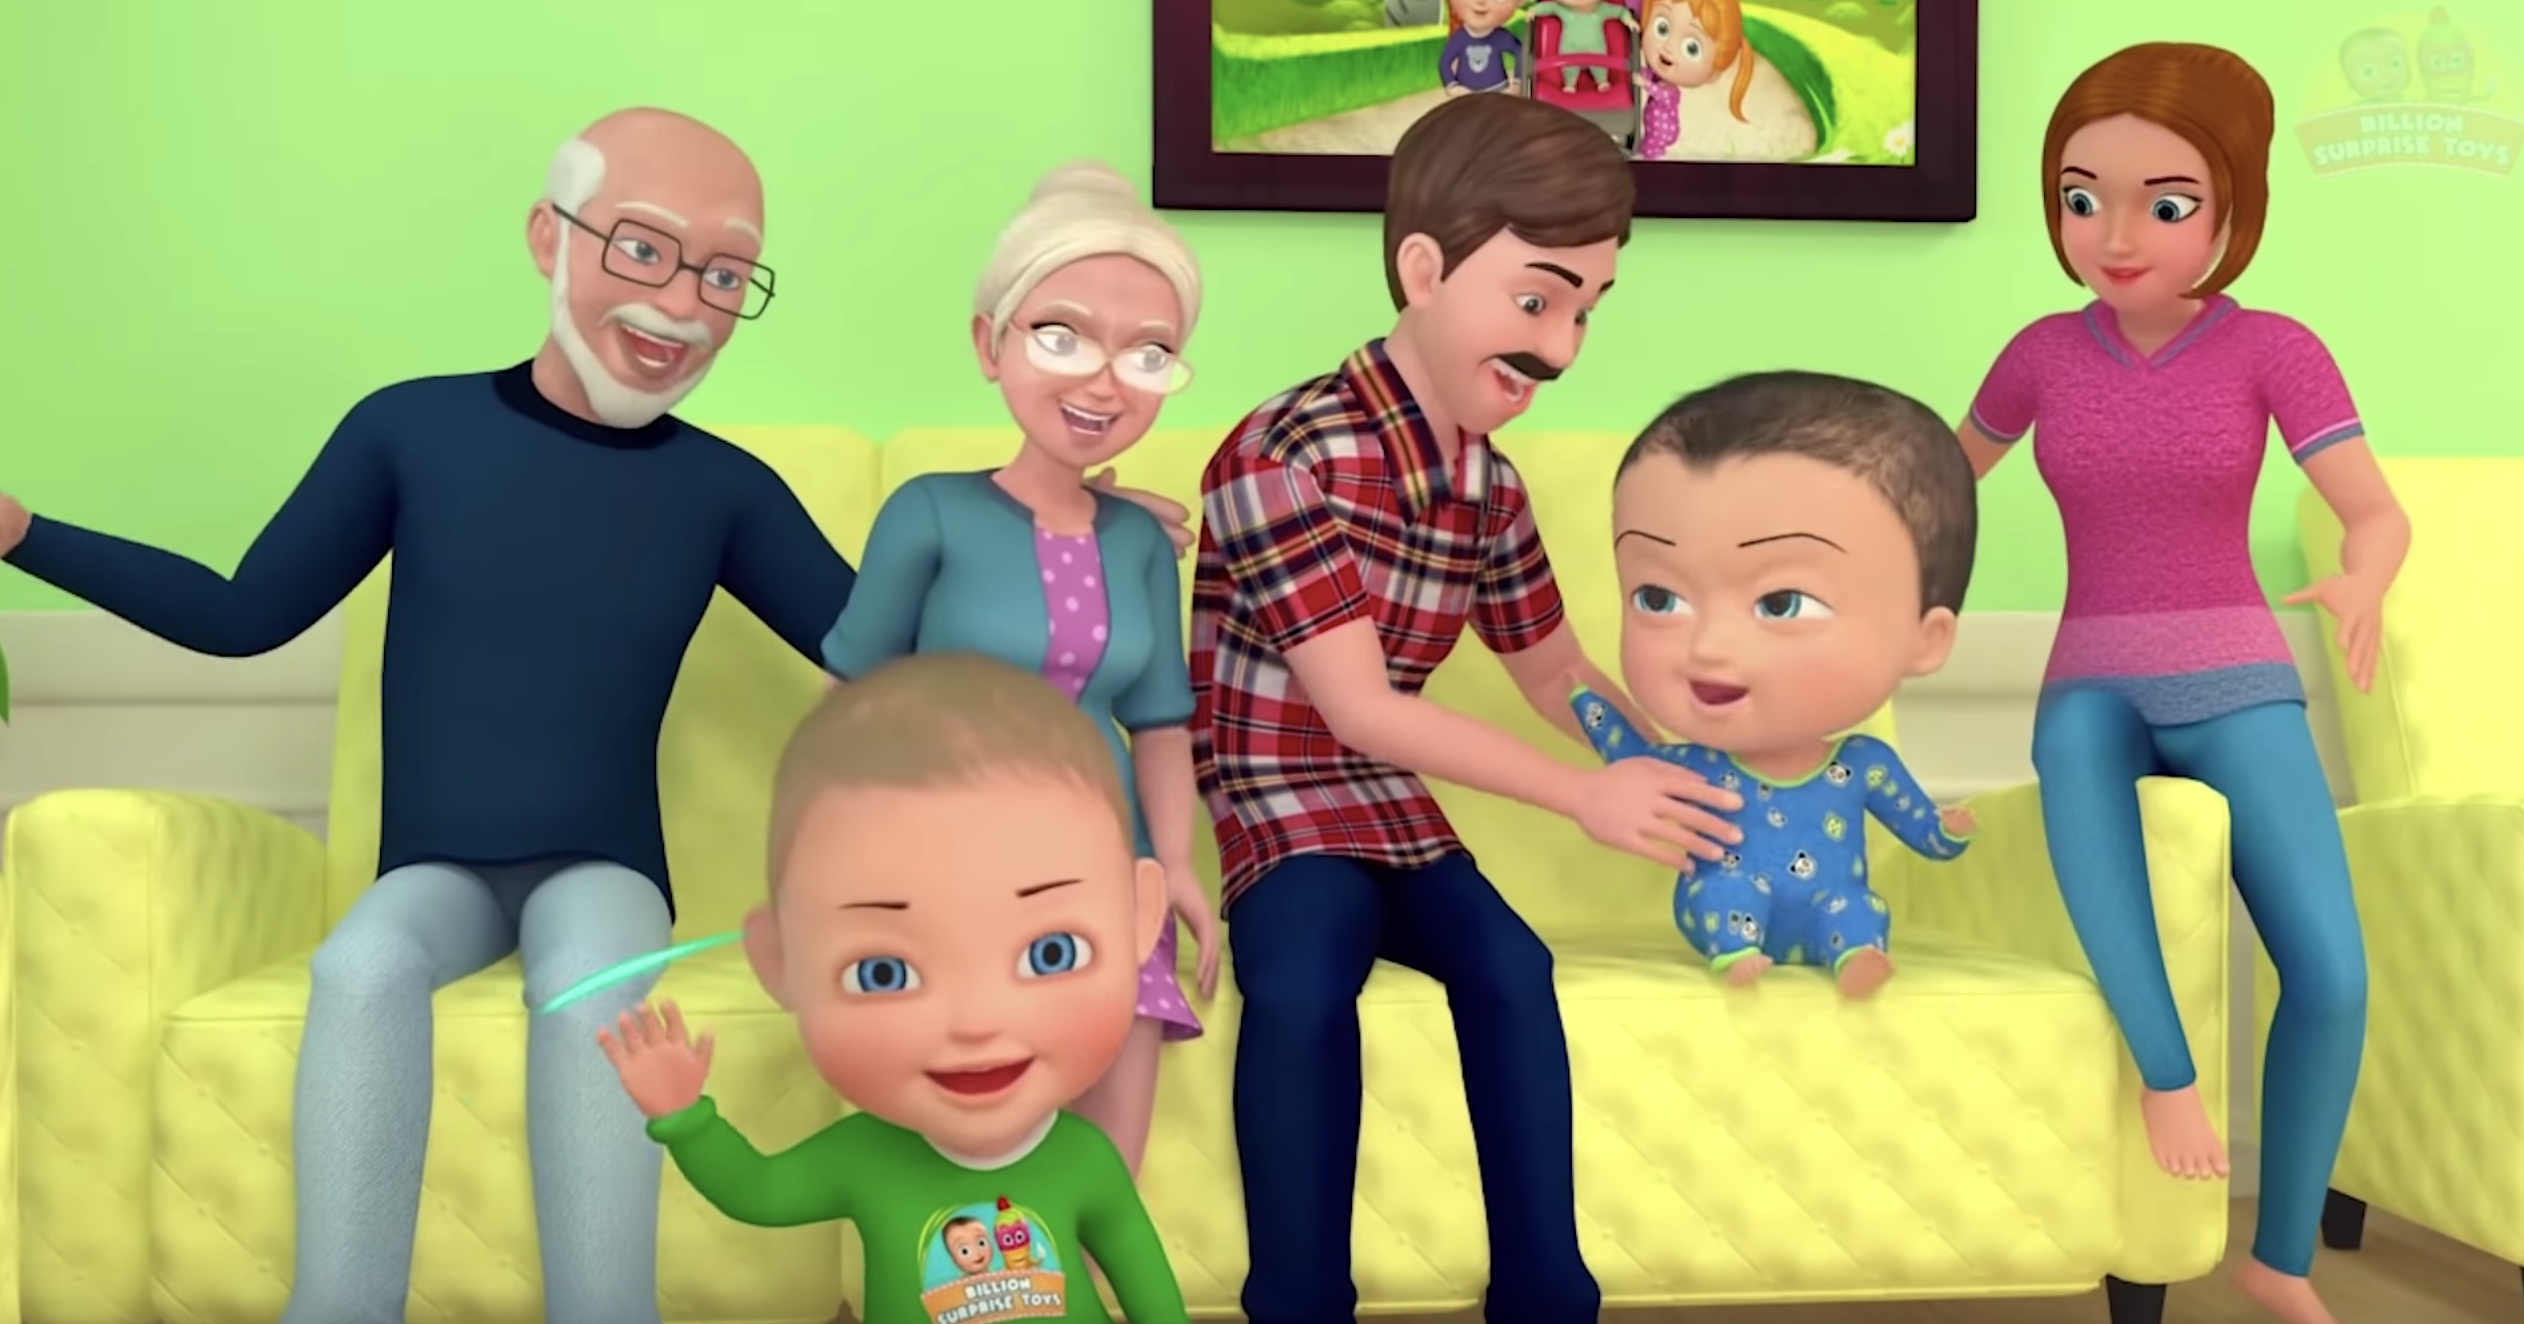 I Spent An Entire Day Watching Johny Johny Videos And Achieved